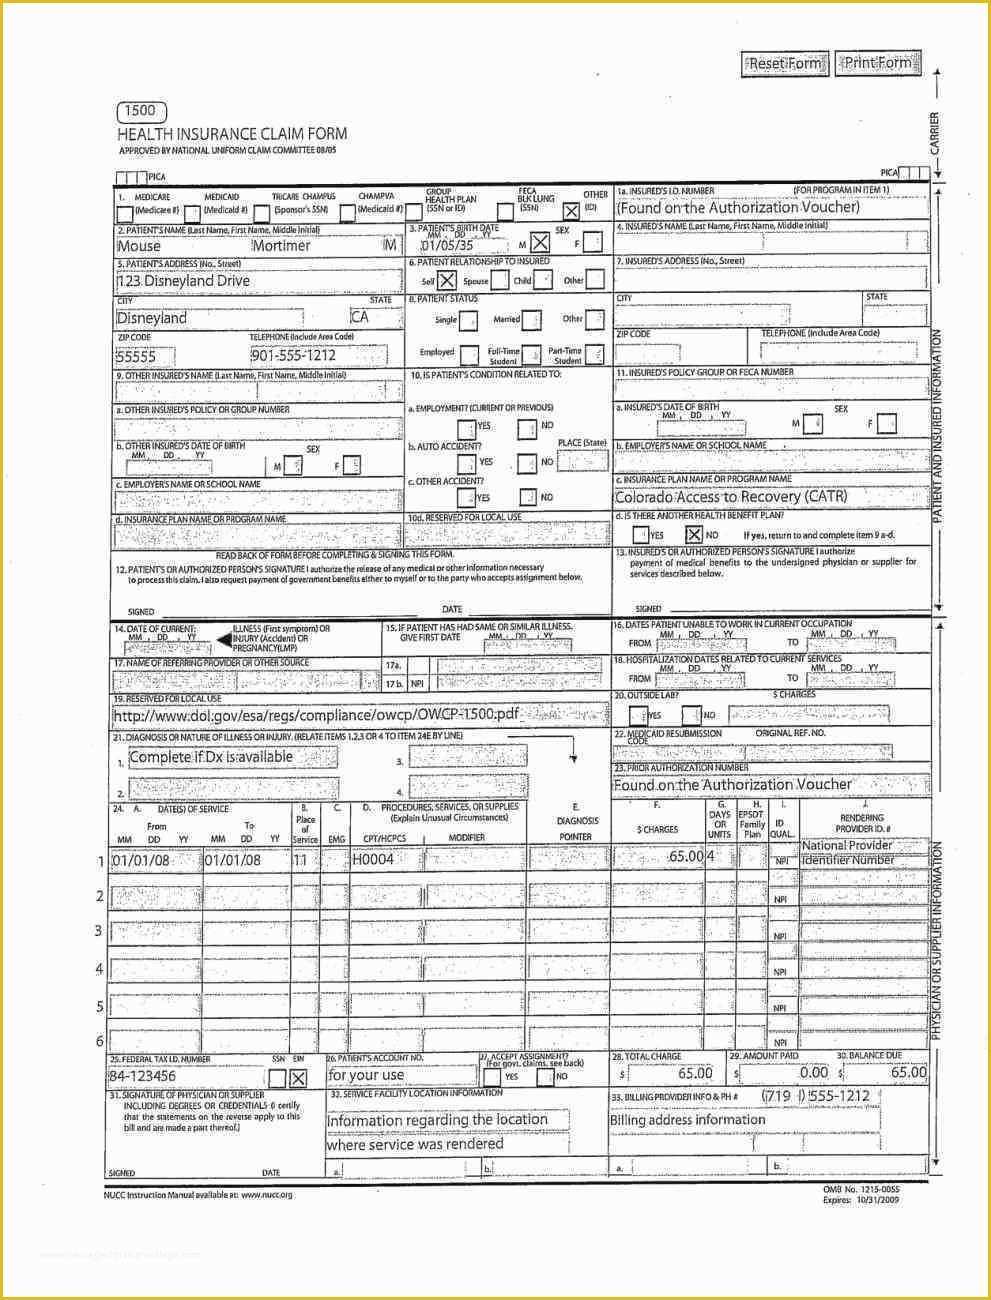 Free Health Insurance Claim form 1500 Template Of Unique Cms 1500 Template Free